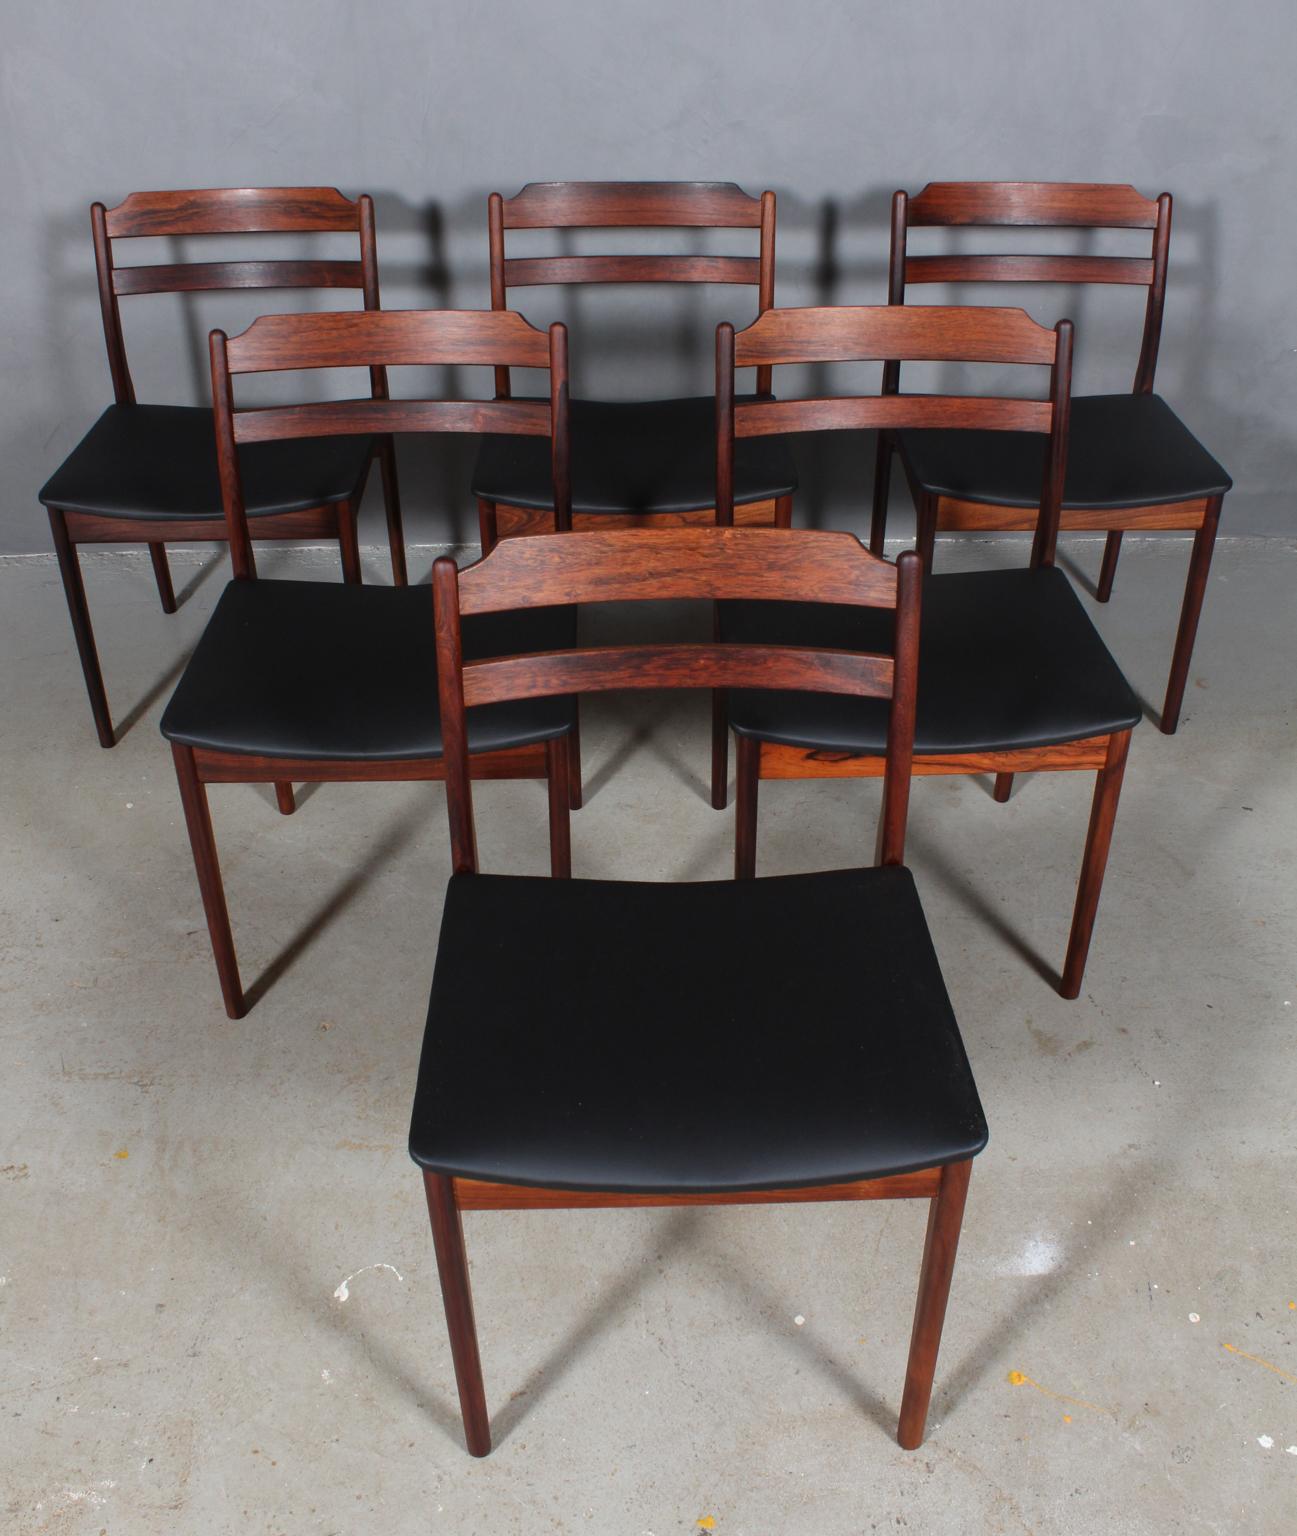 Danish cabinetmaker. Six rosewood dining chairs.

New upholstered with black leather.